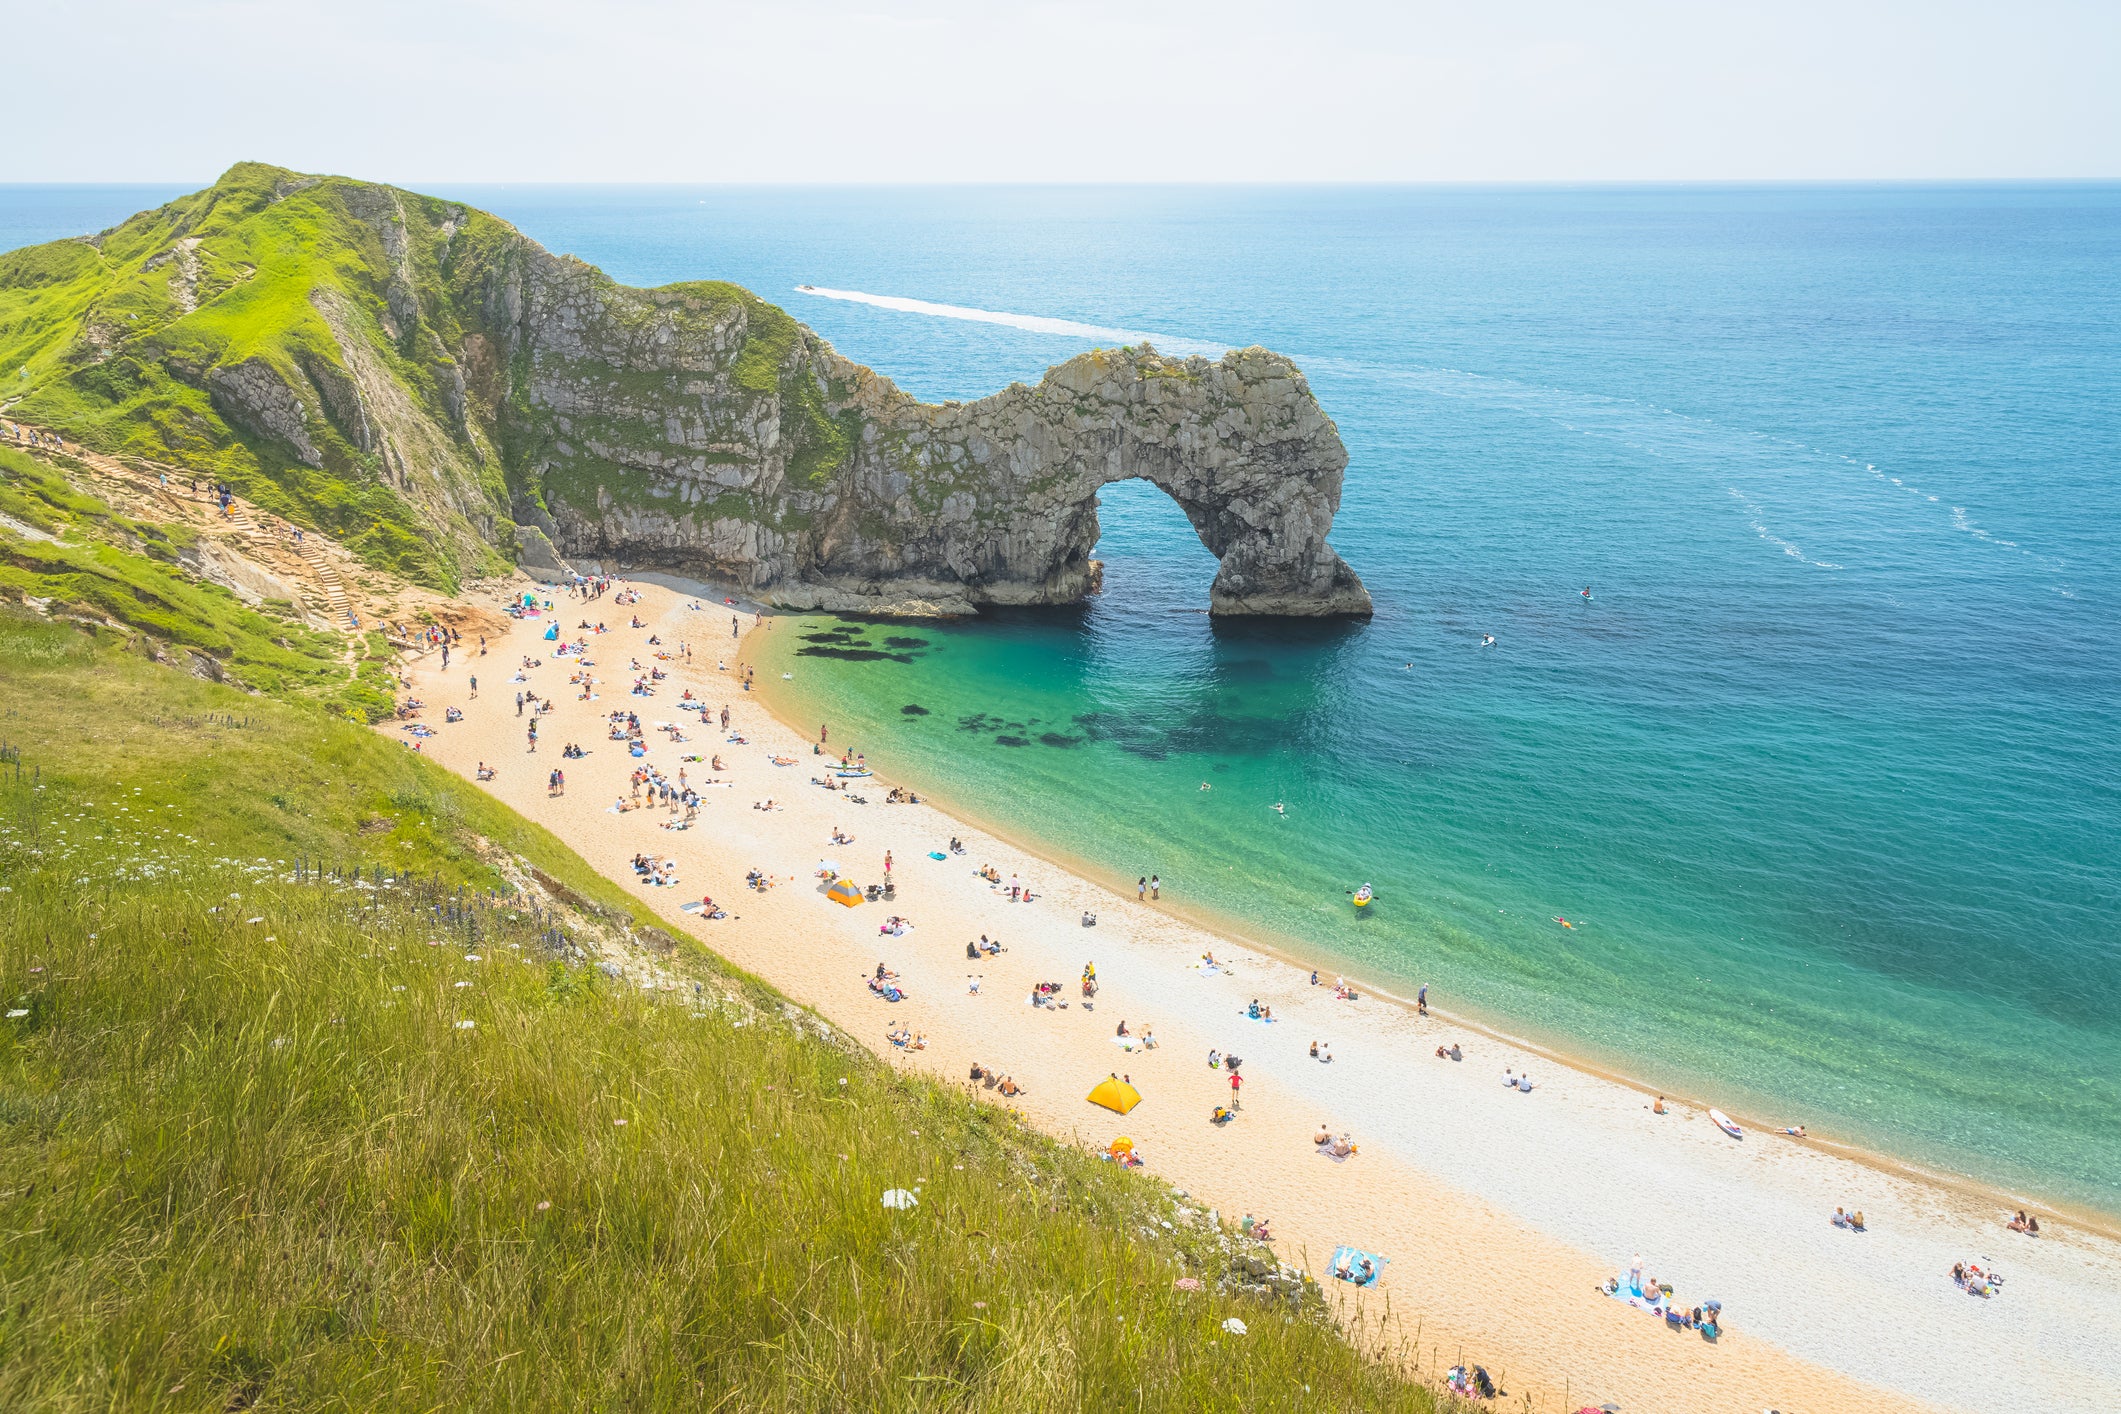 Durdle Door, with its iconic archway, is a great coastal spot for a dog walk